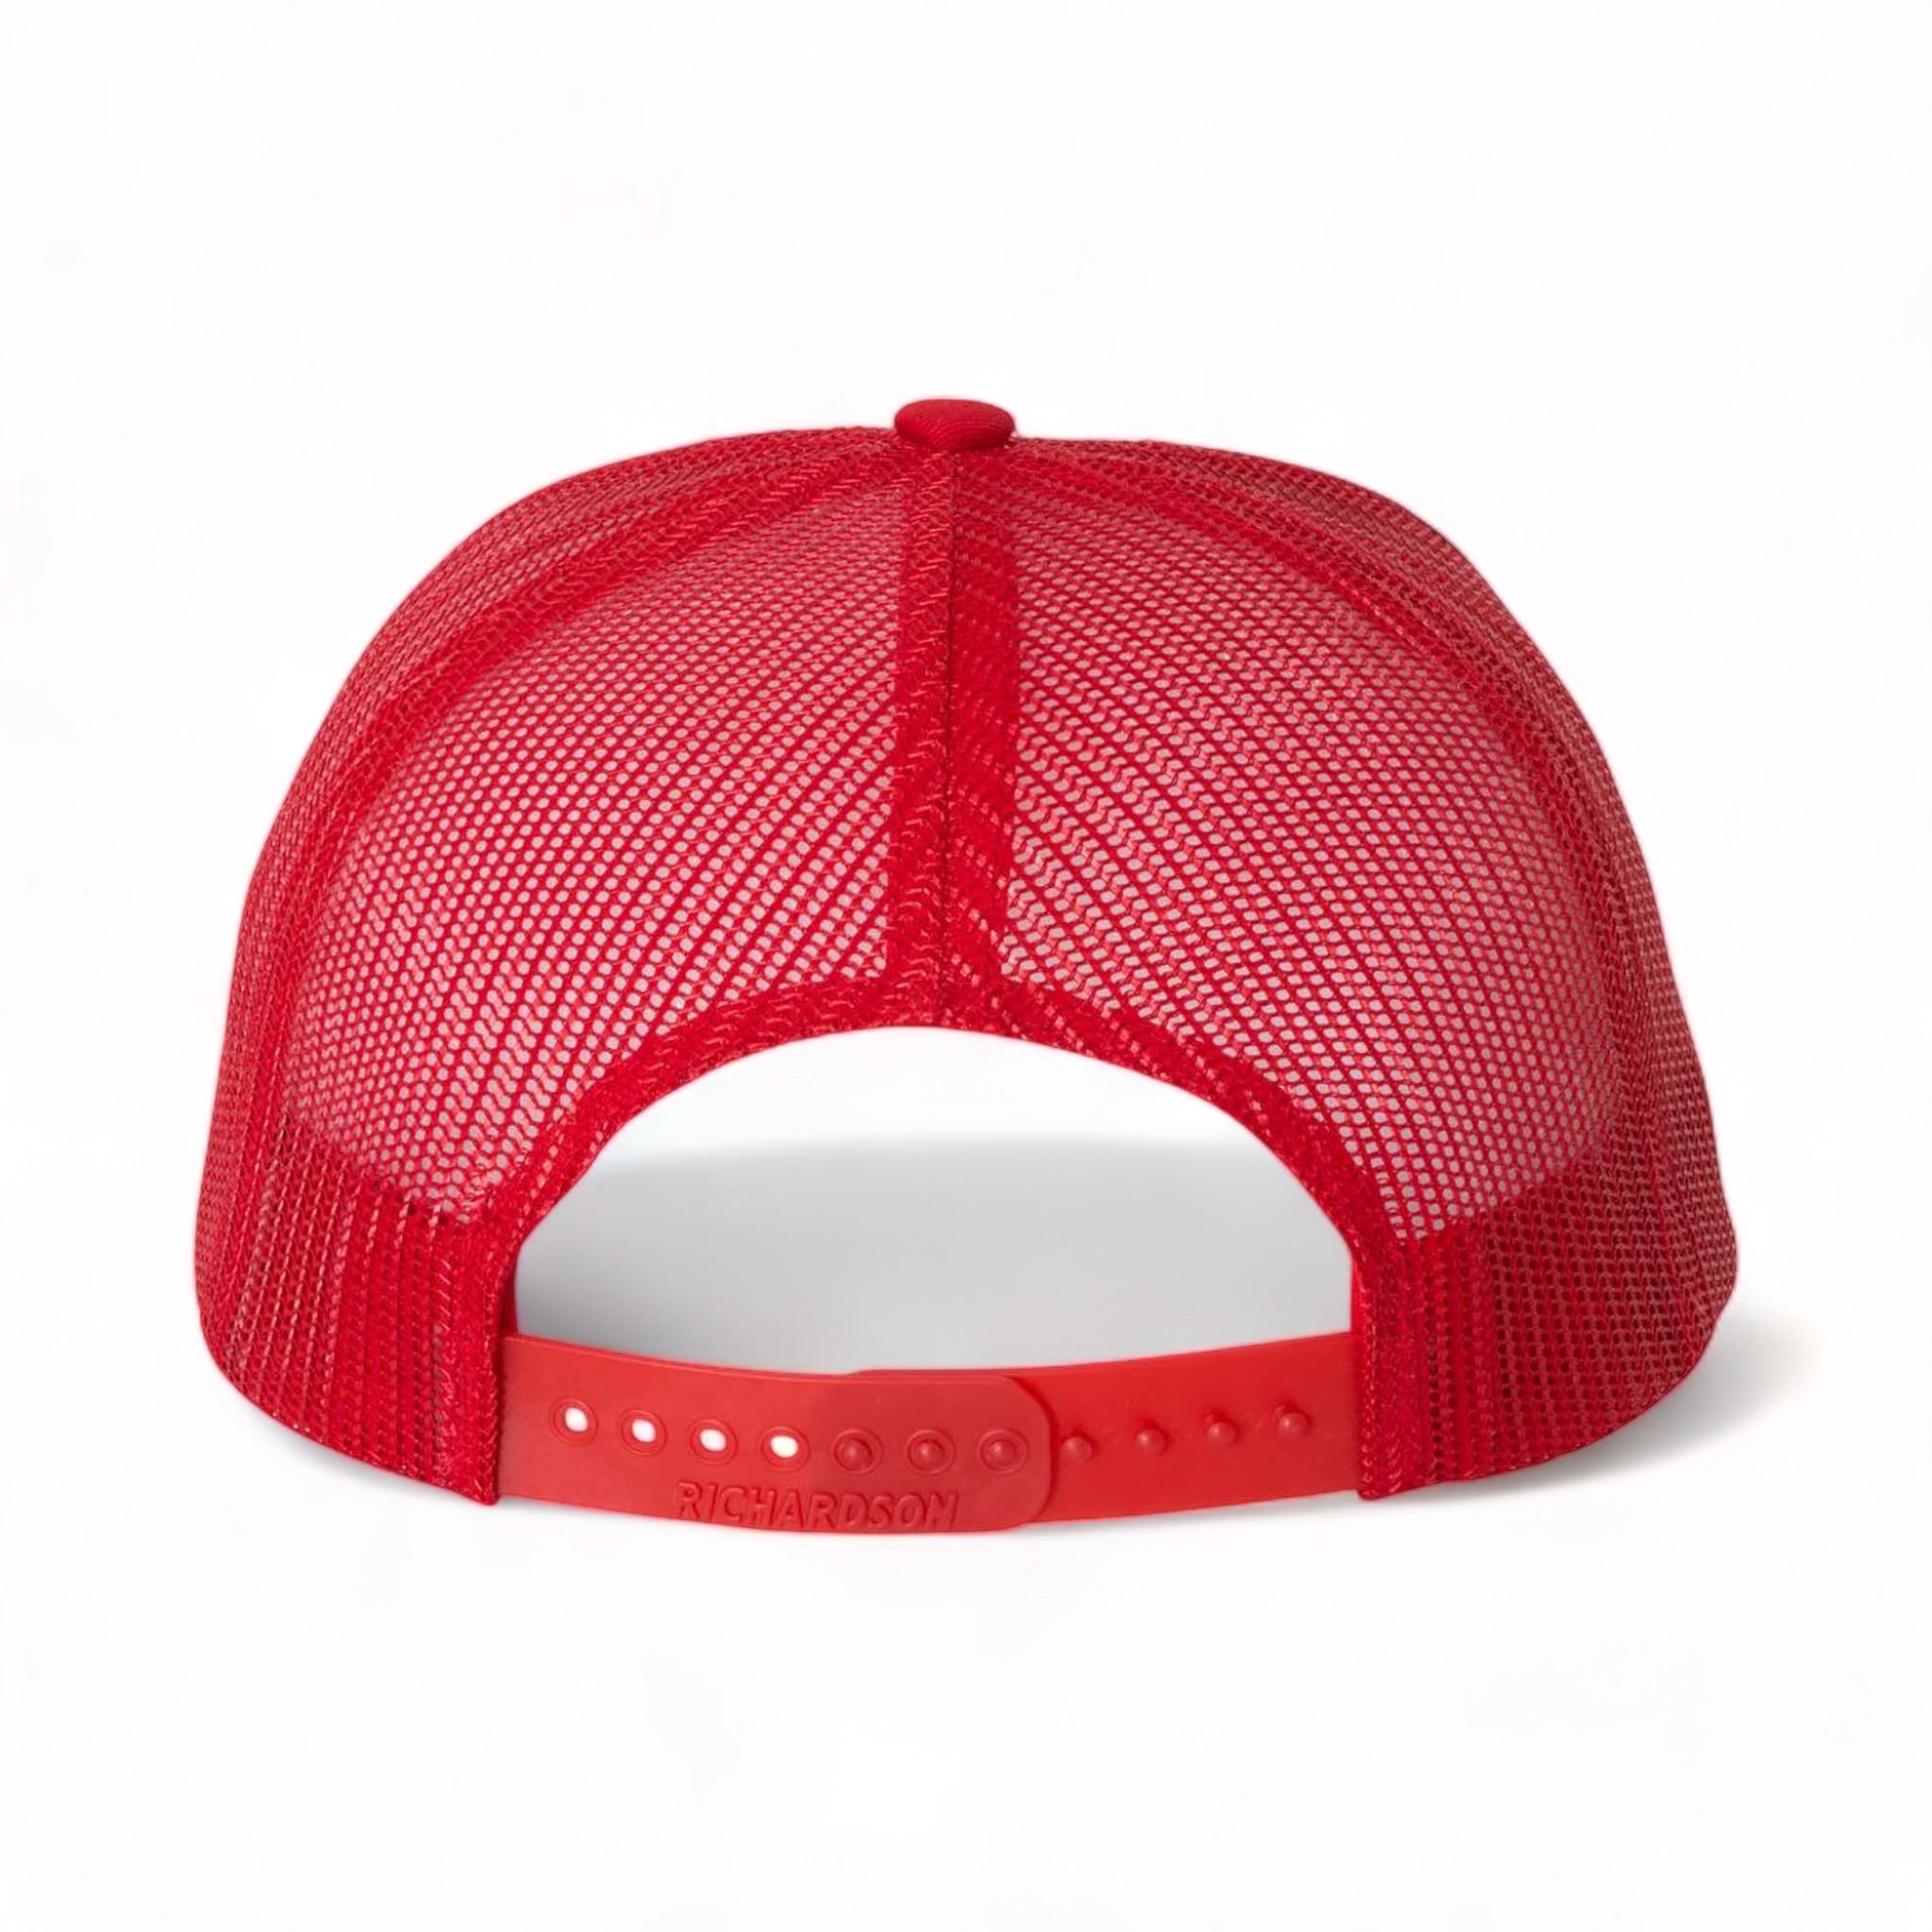 Back view of Richardson 112 custom hat in white and red